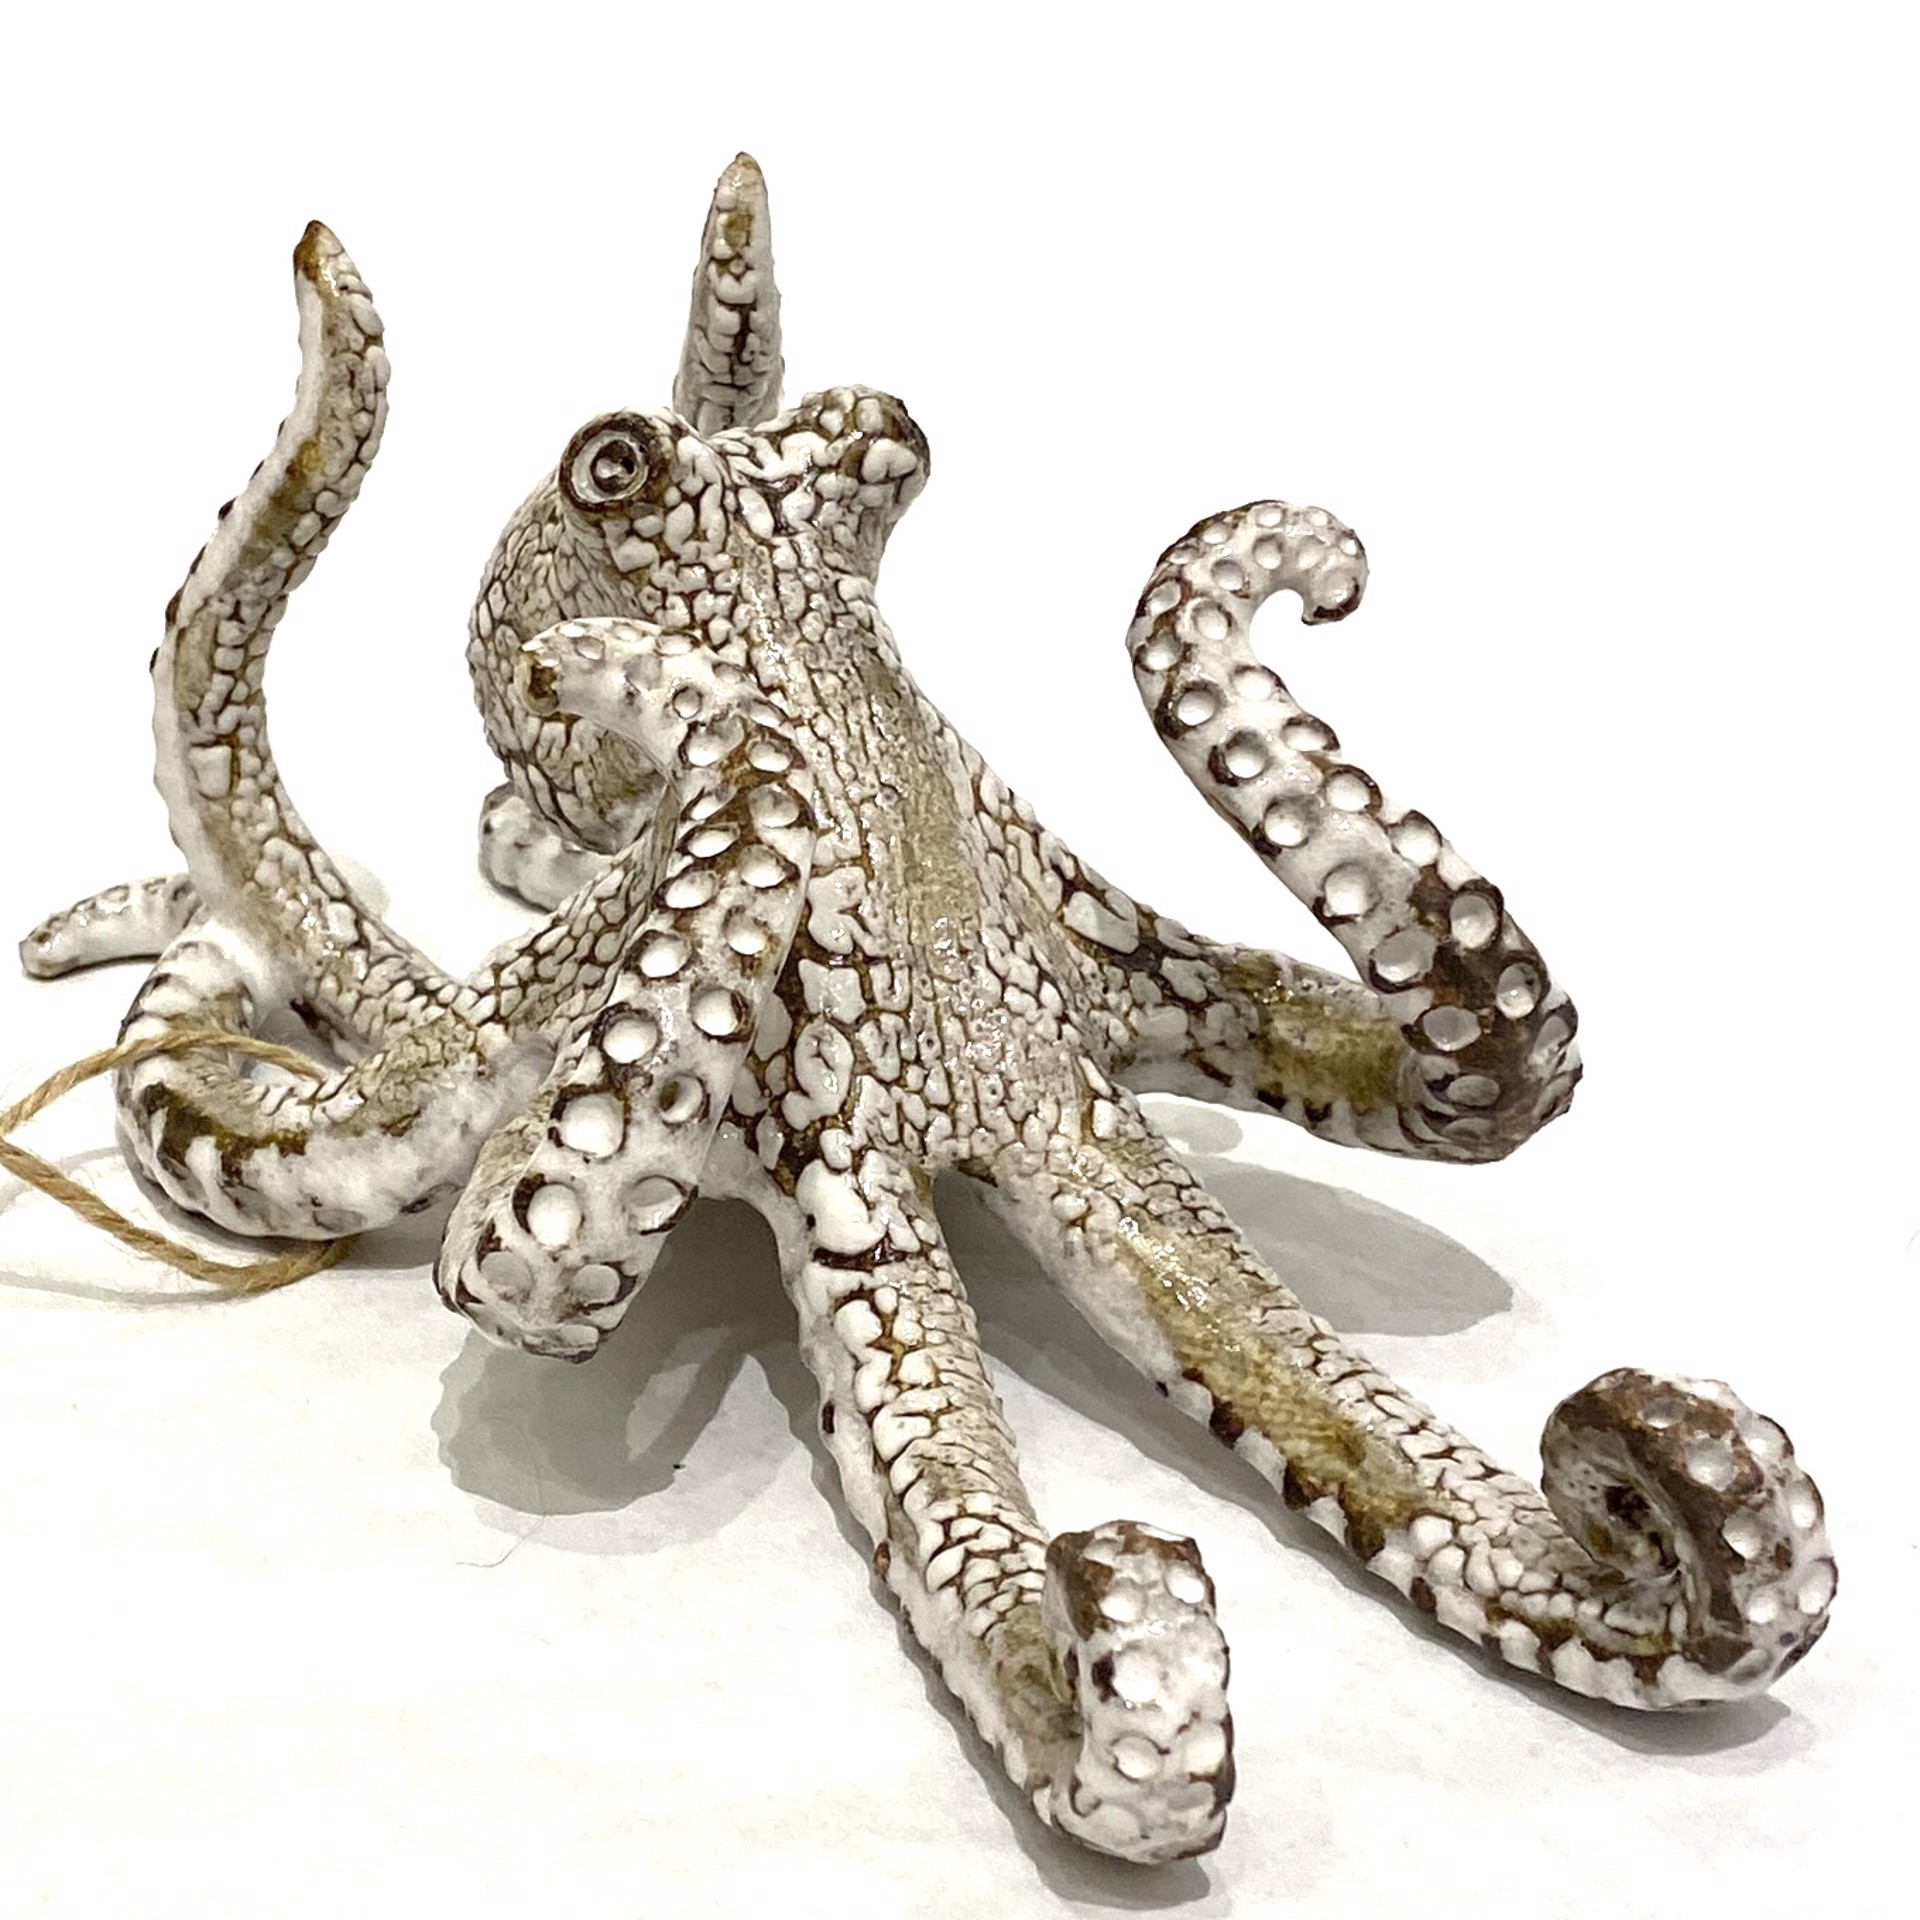 Octopus Cell Phone or Business Card Holder by Shayne Greco